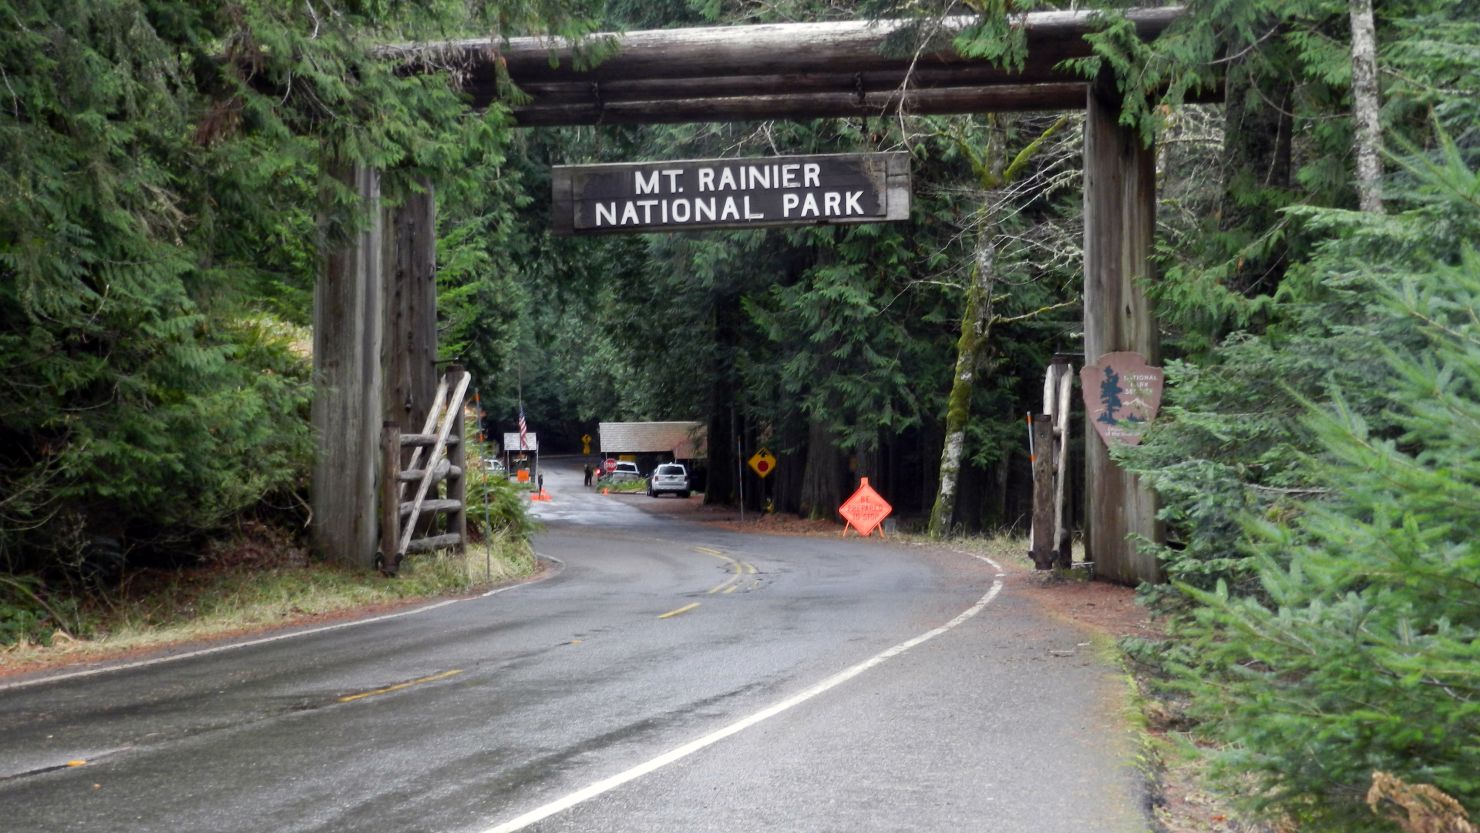 "This tragedy has pretty much affected every employee at the park," said Mount Rainier National Park spokesman  Charles Beall.